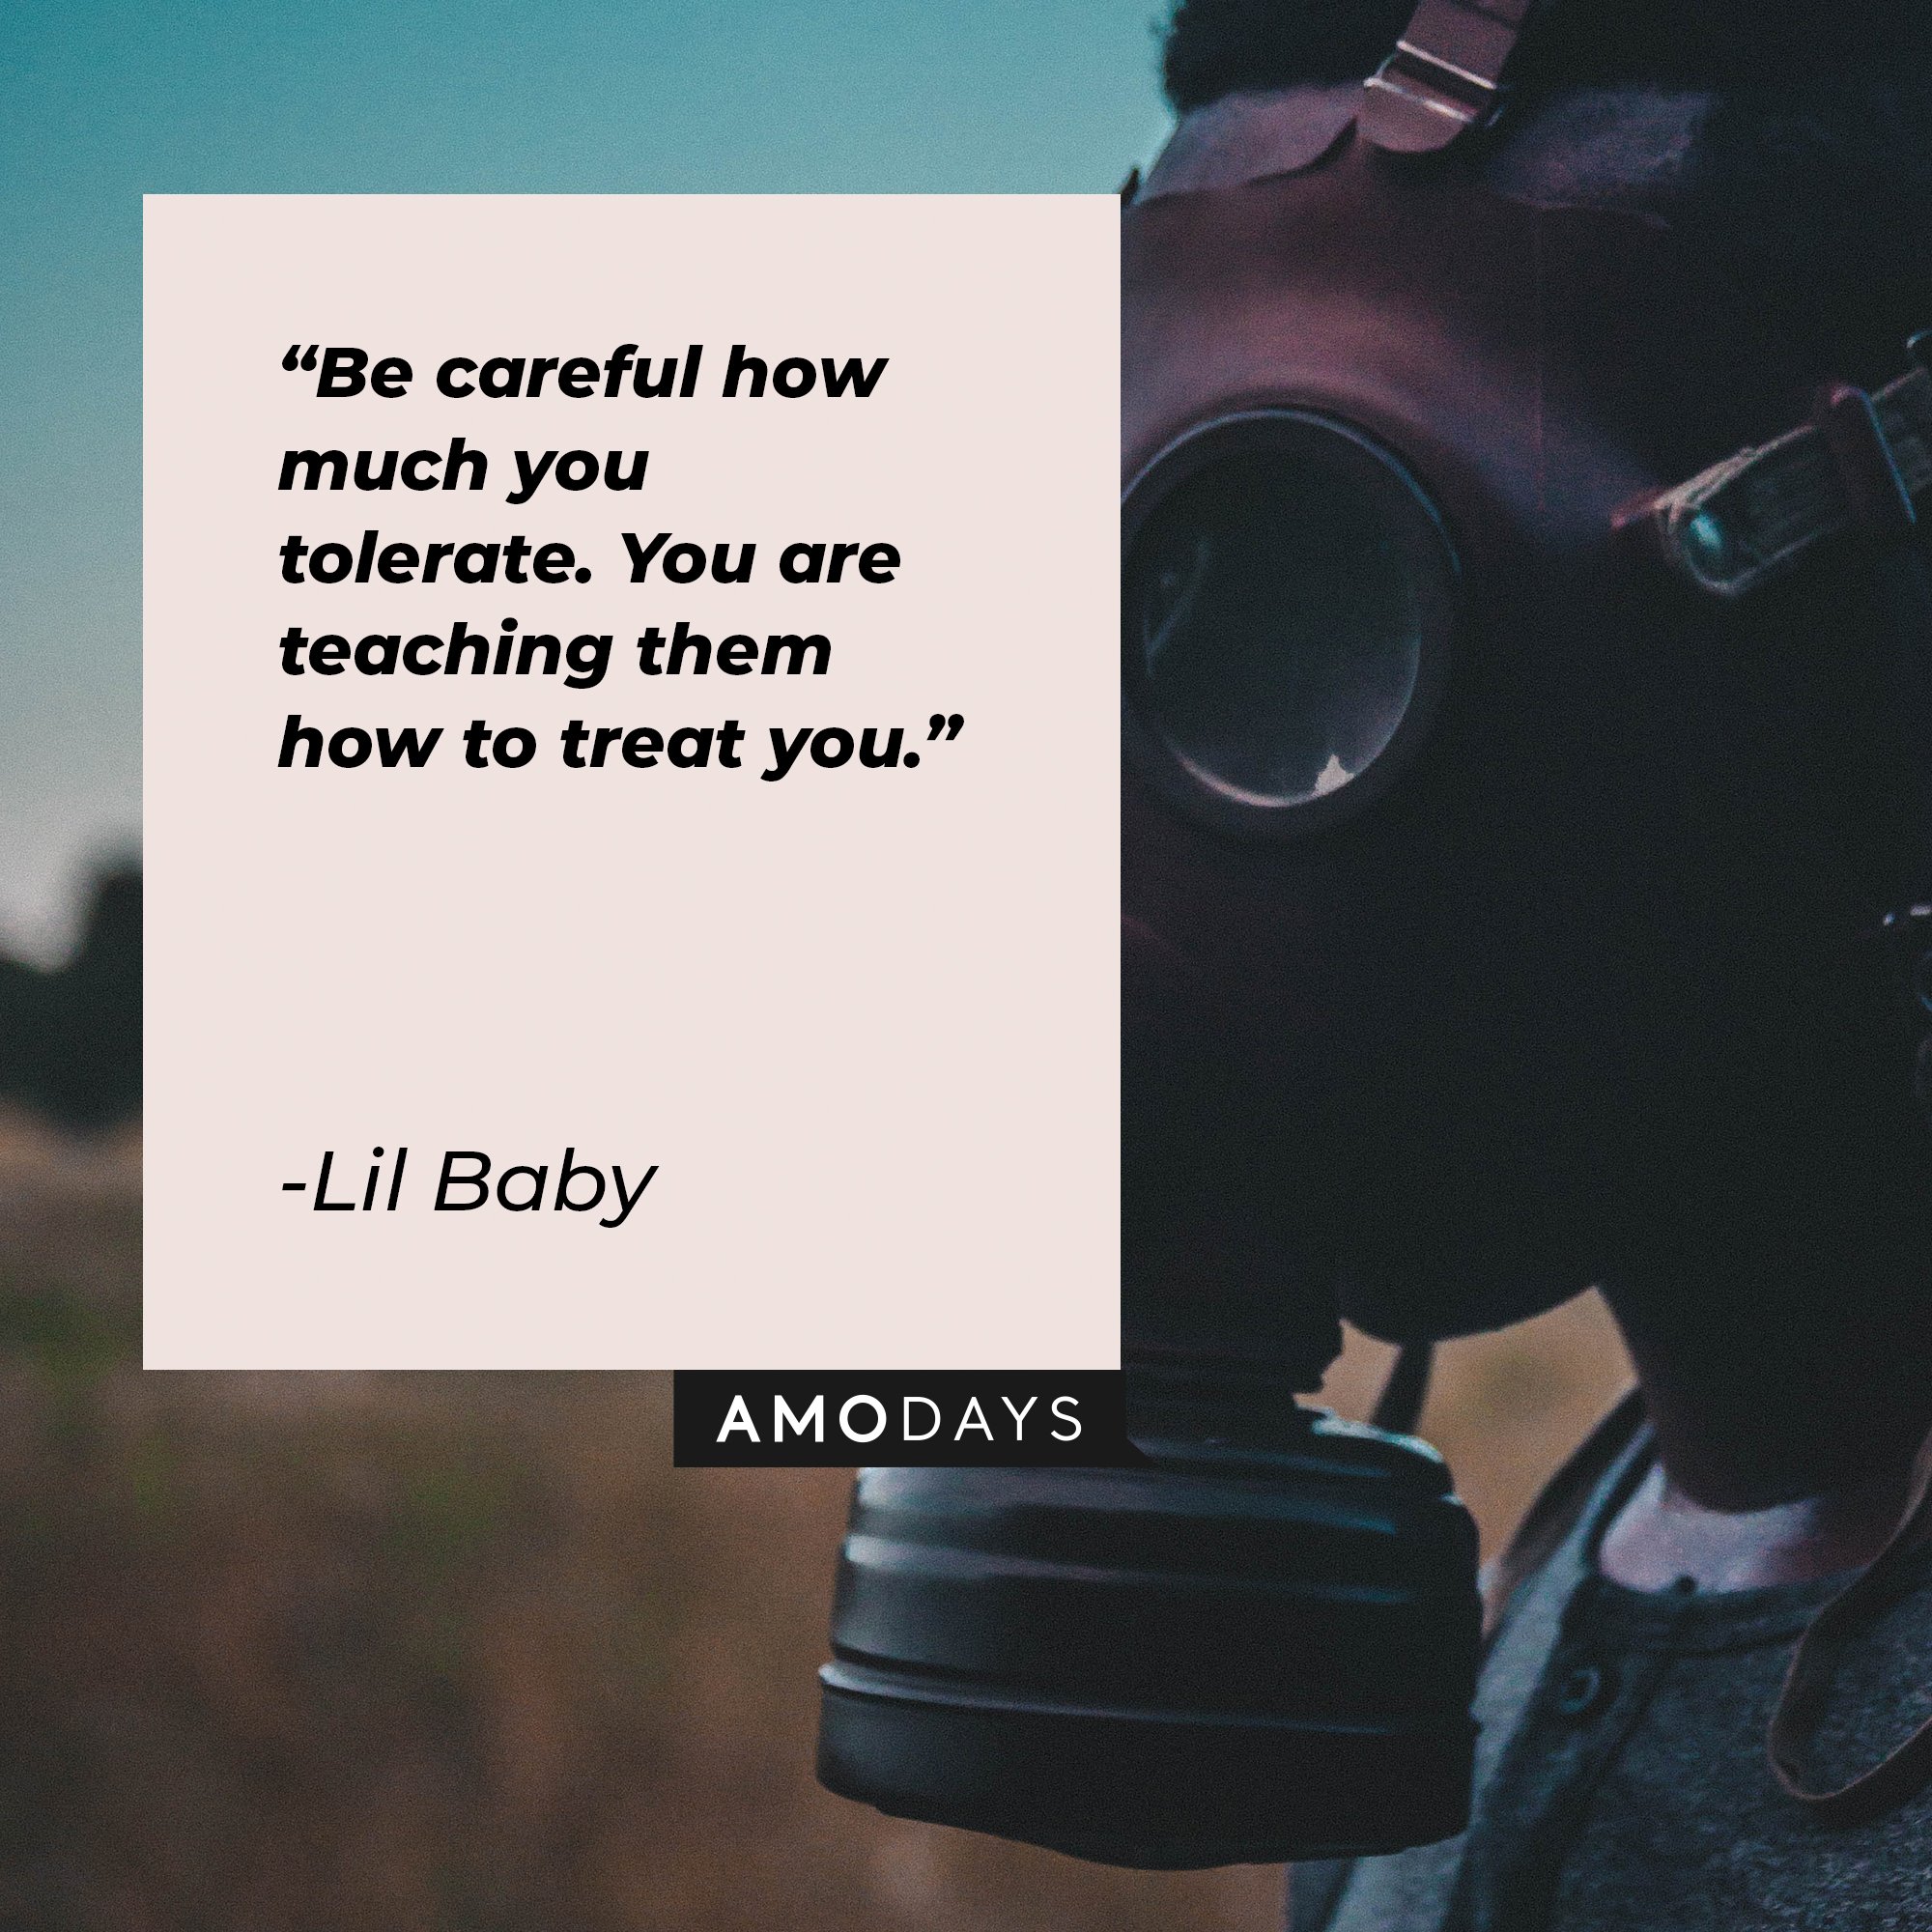 Lil Baby’s quote: "Be careful how much you tolerate. You are teaching them how to treat you." | Image: AmoDays